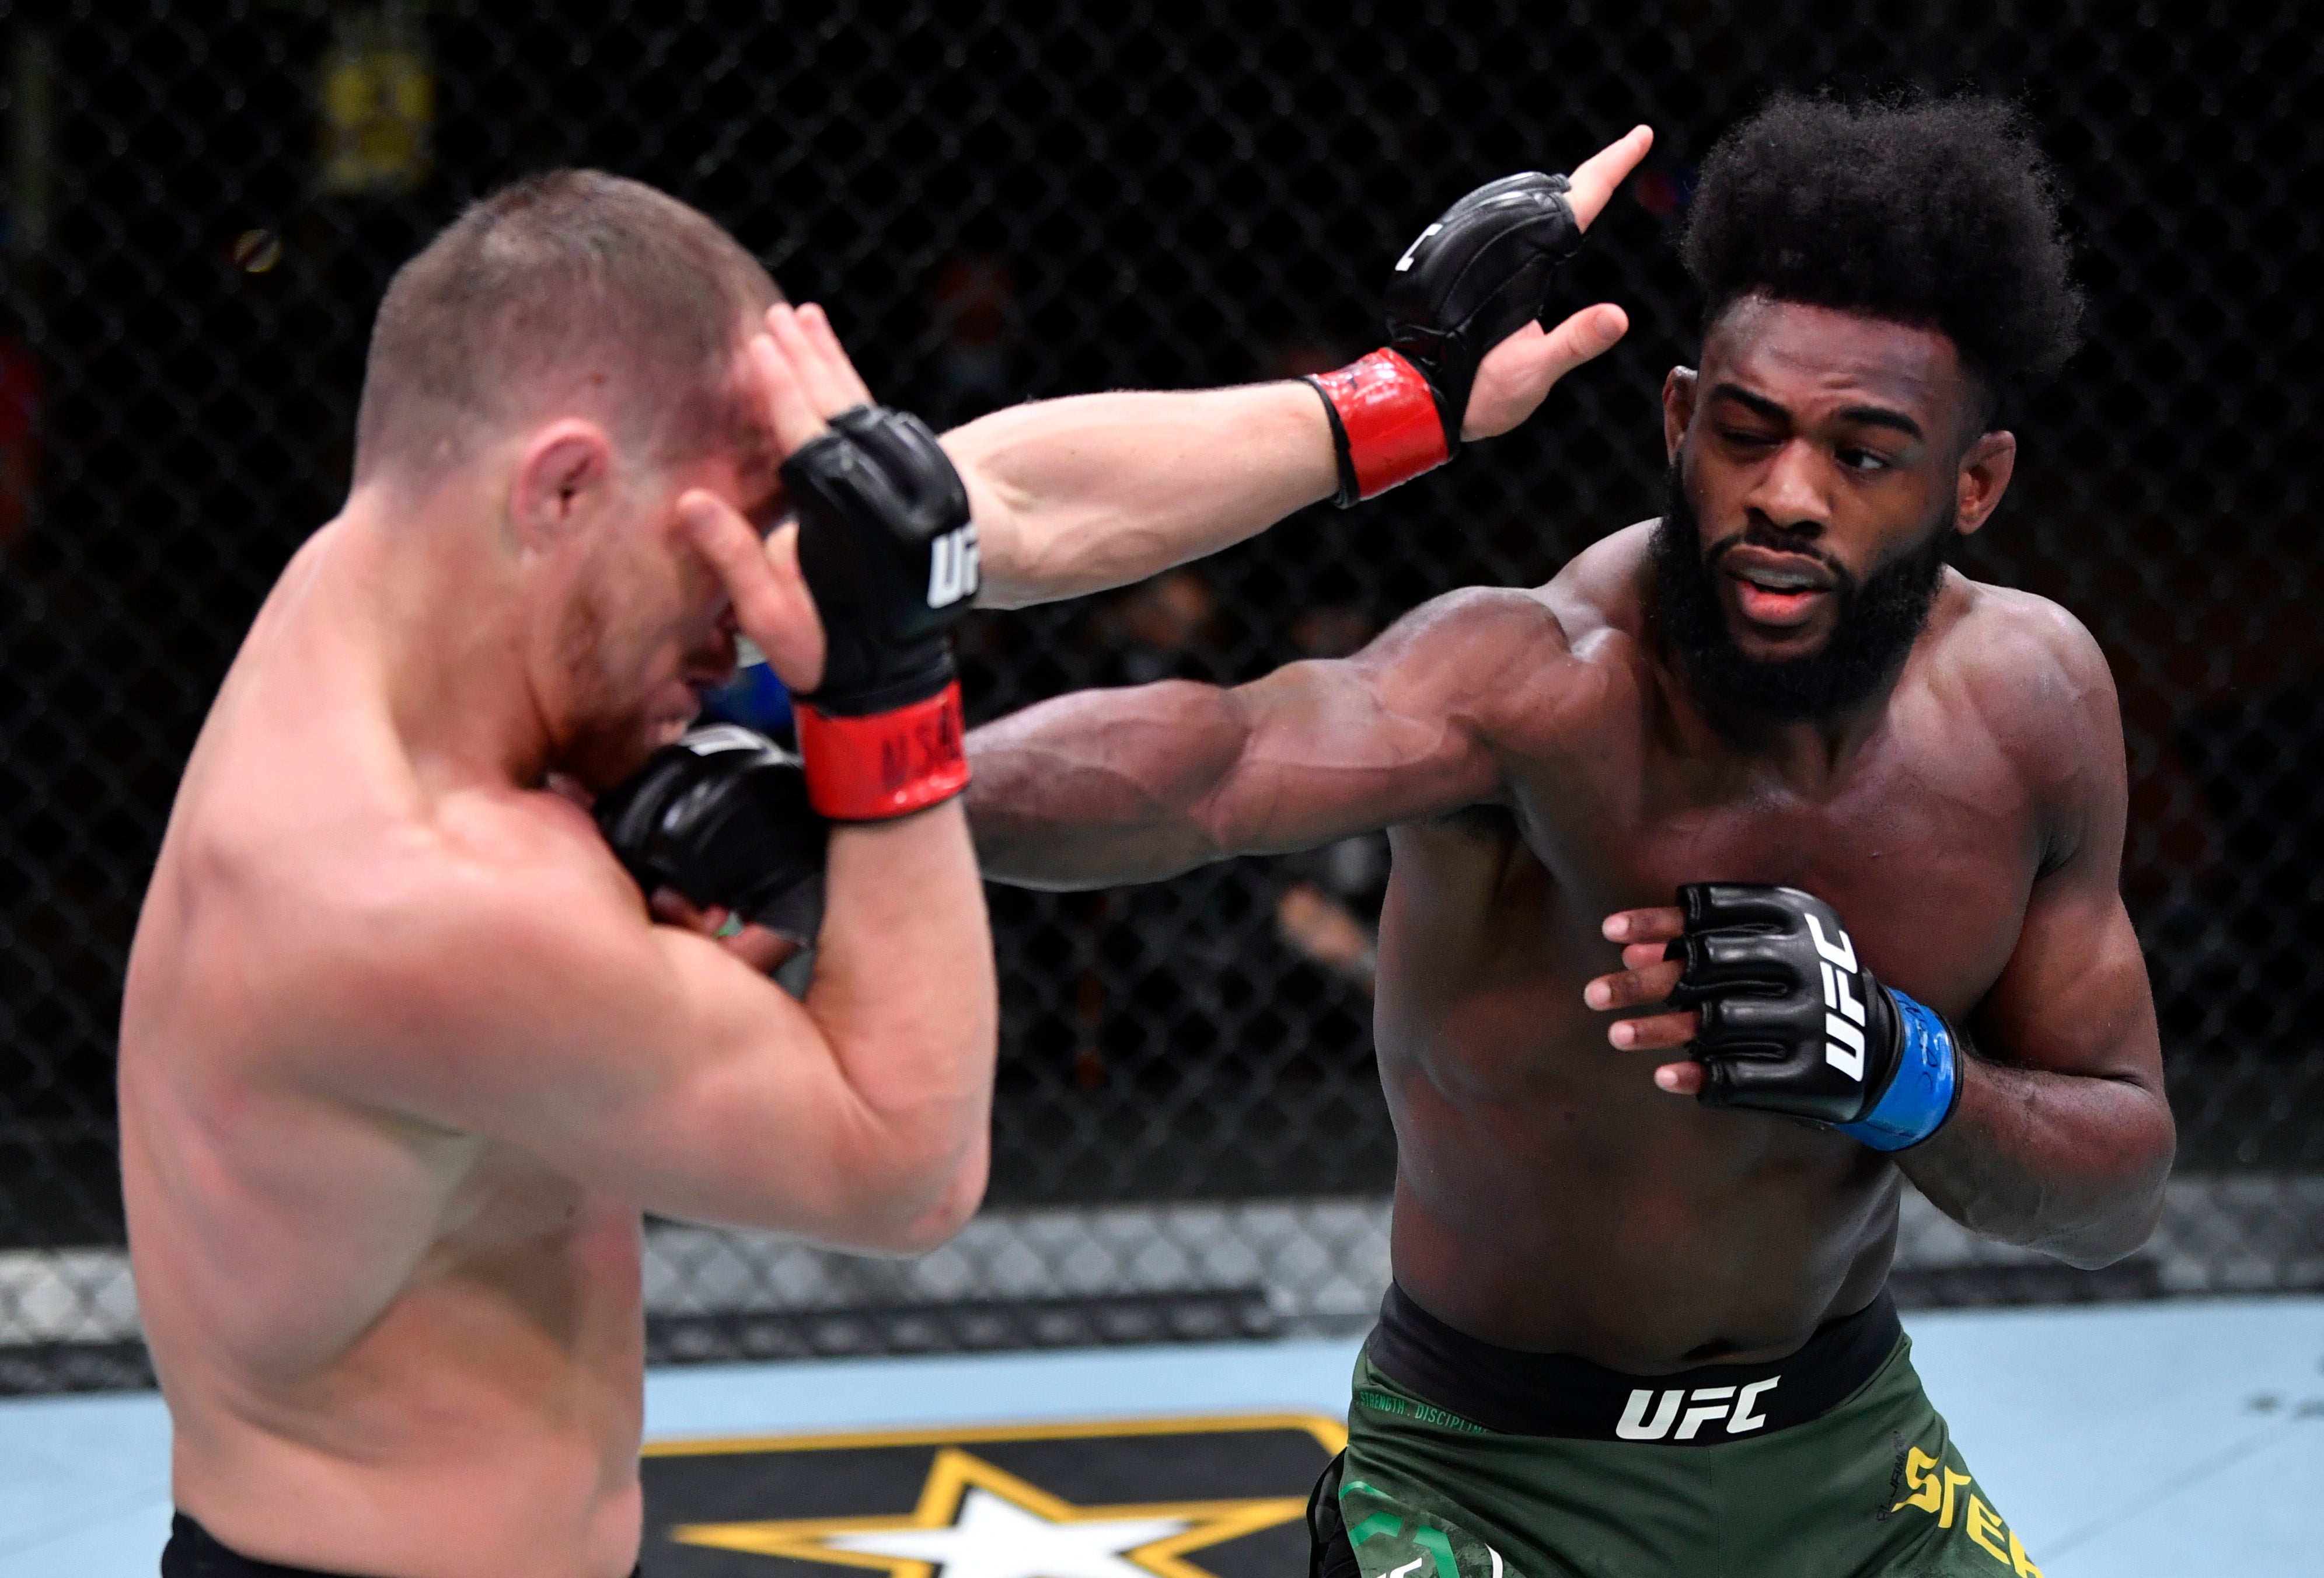 Petr Yan (left) and Aljamain Sterling will rematch at UFC 273